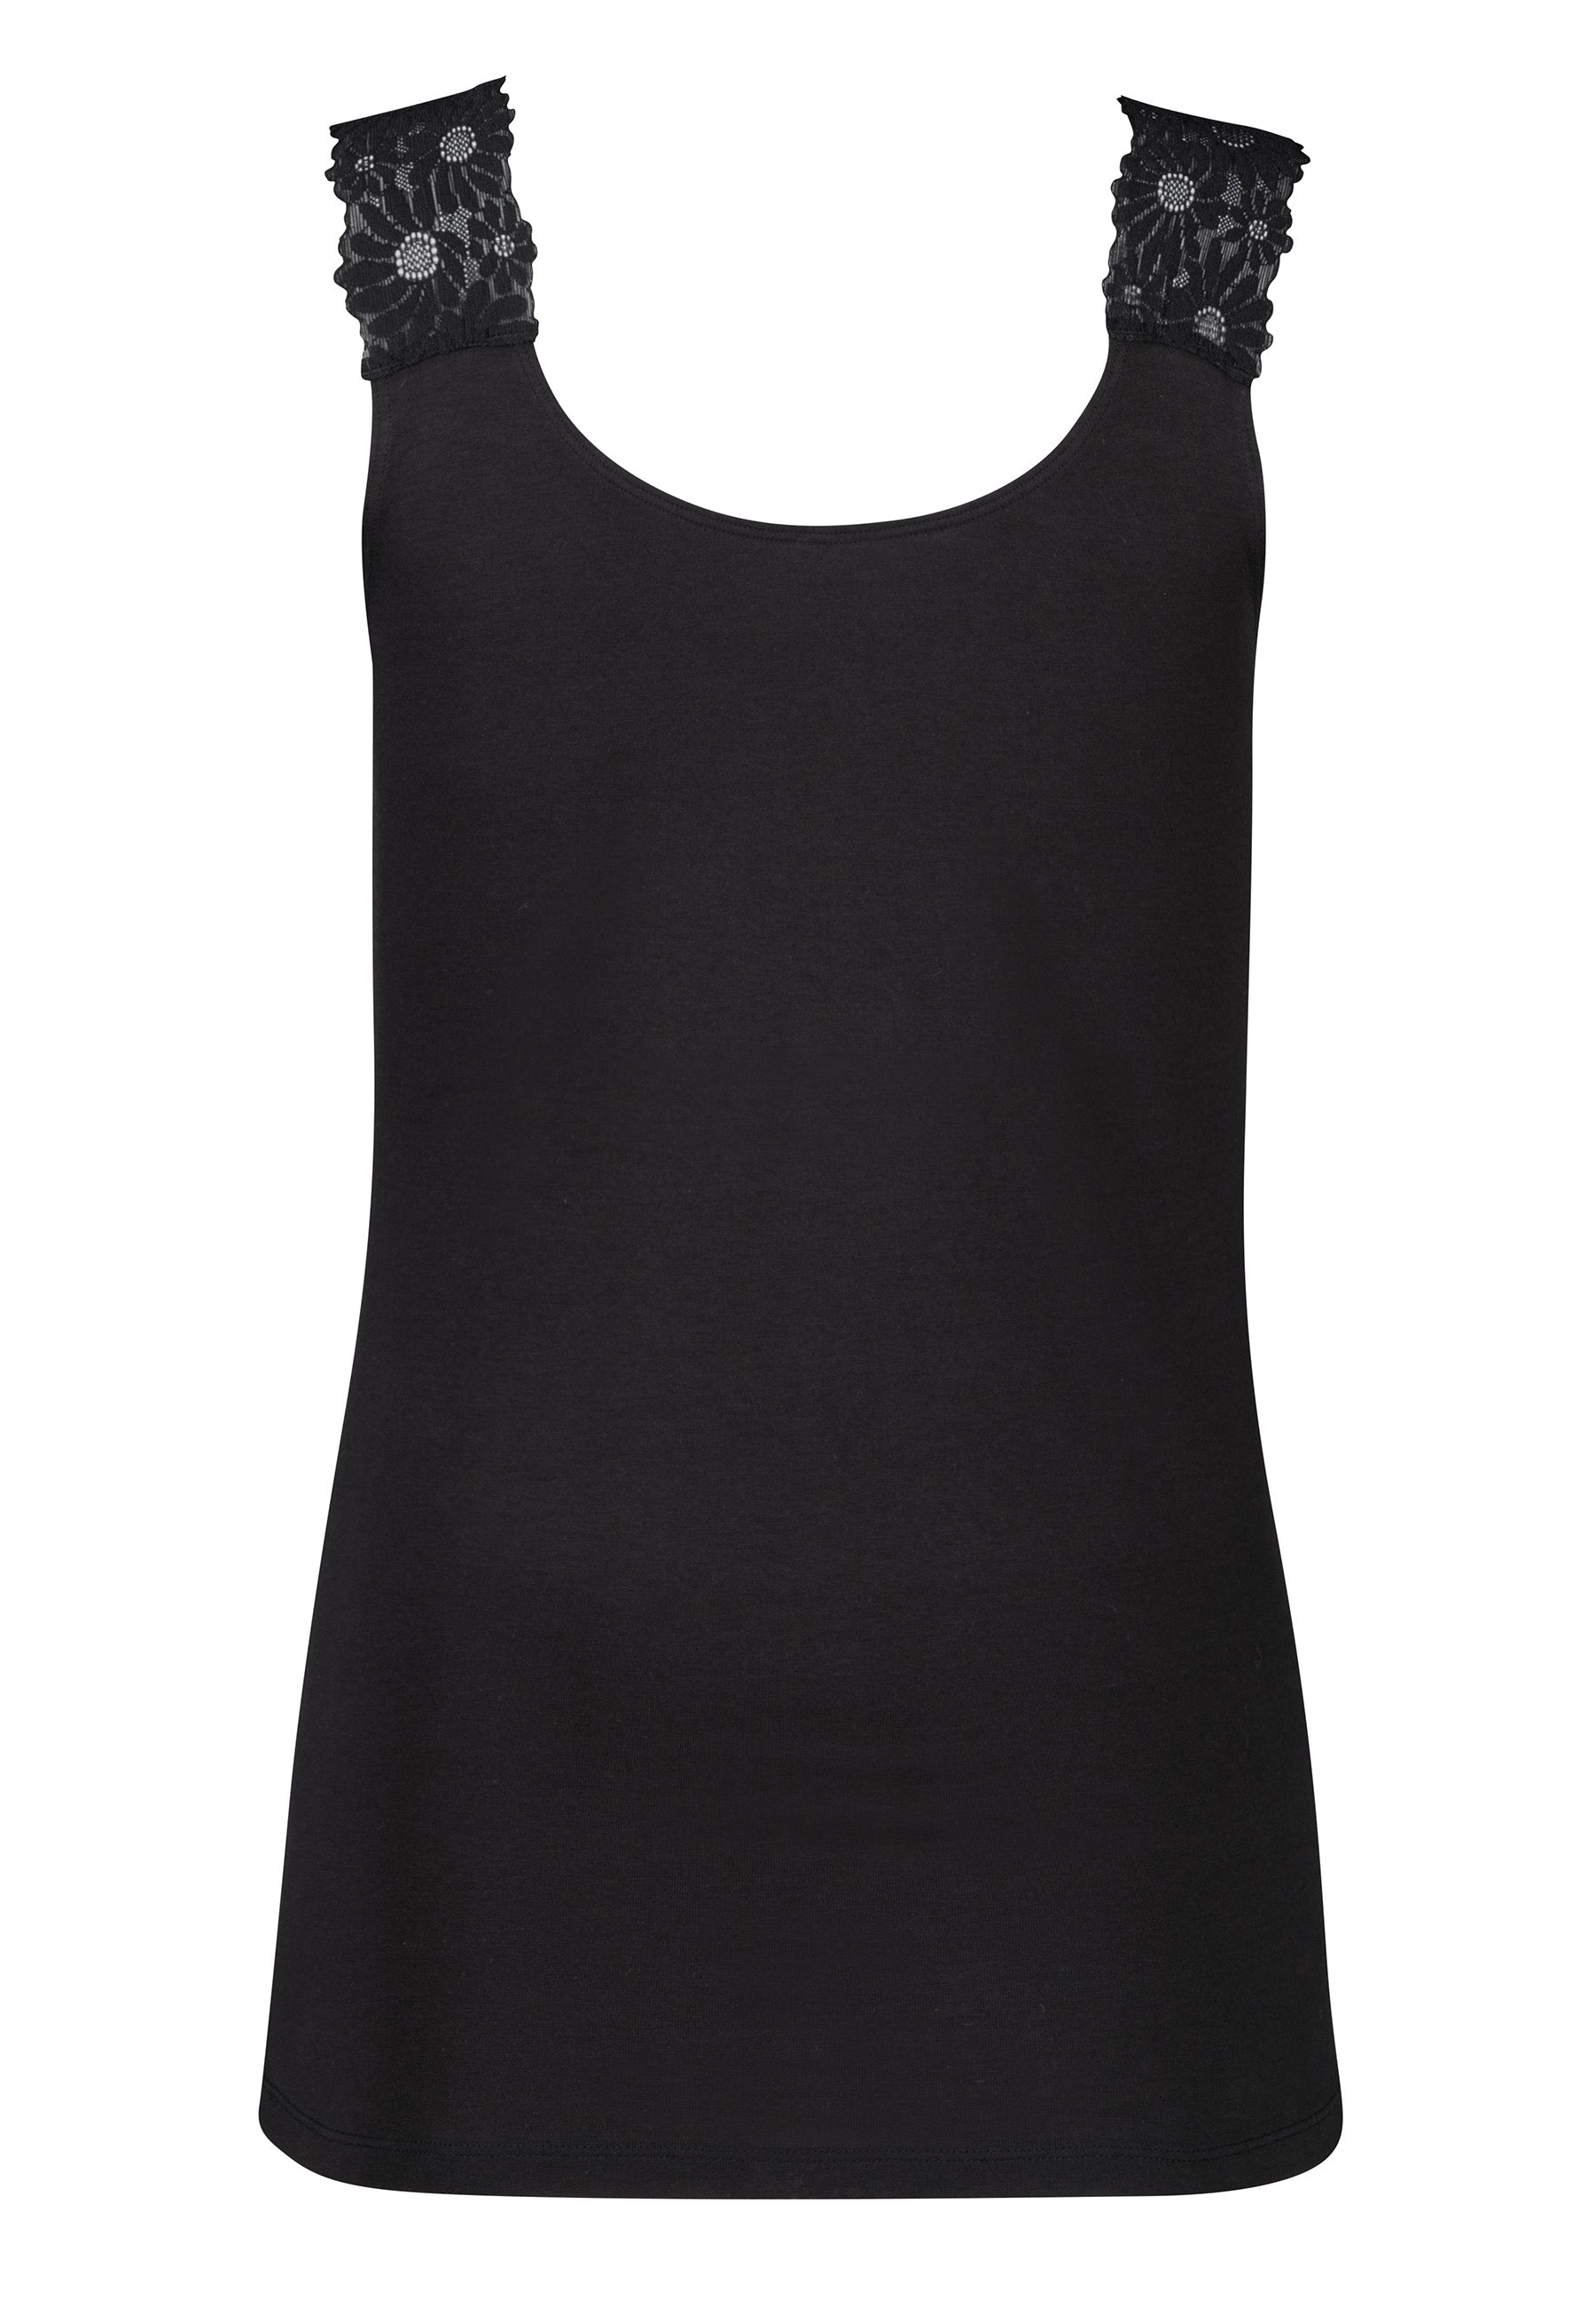 Skiny Every Day In CottonLace Multipack Damen Tank Top (Black)